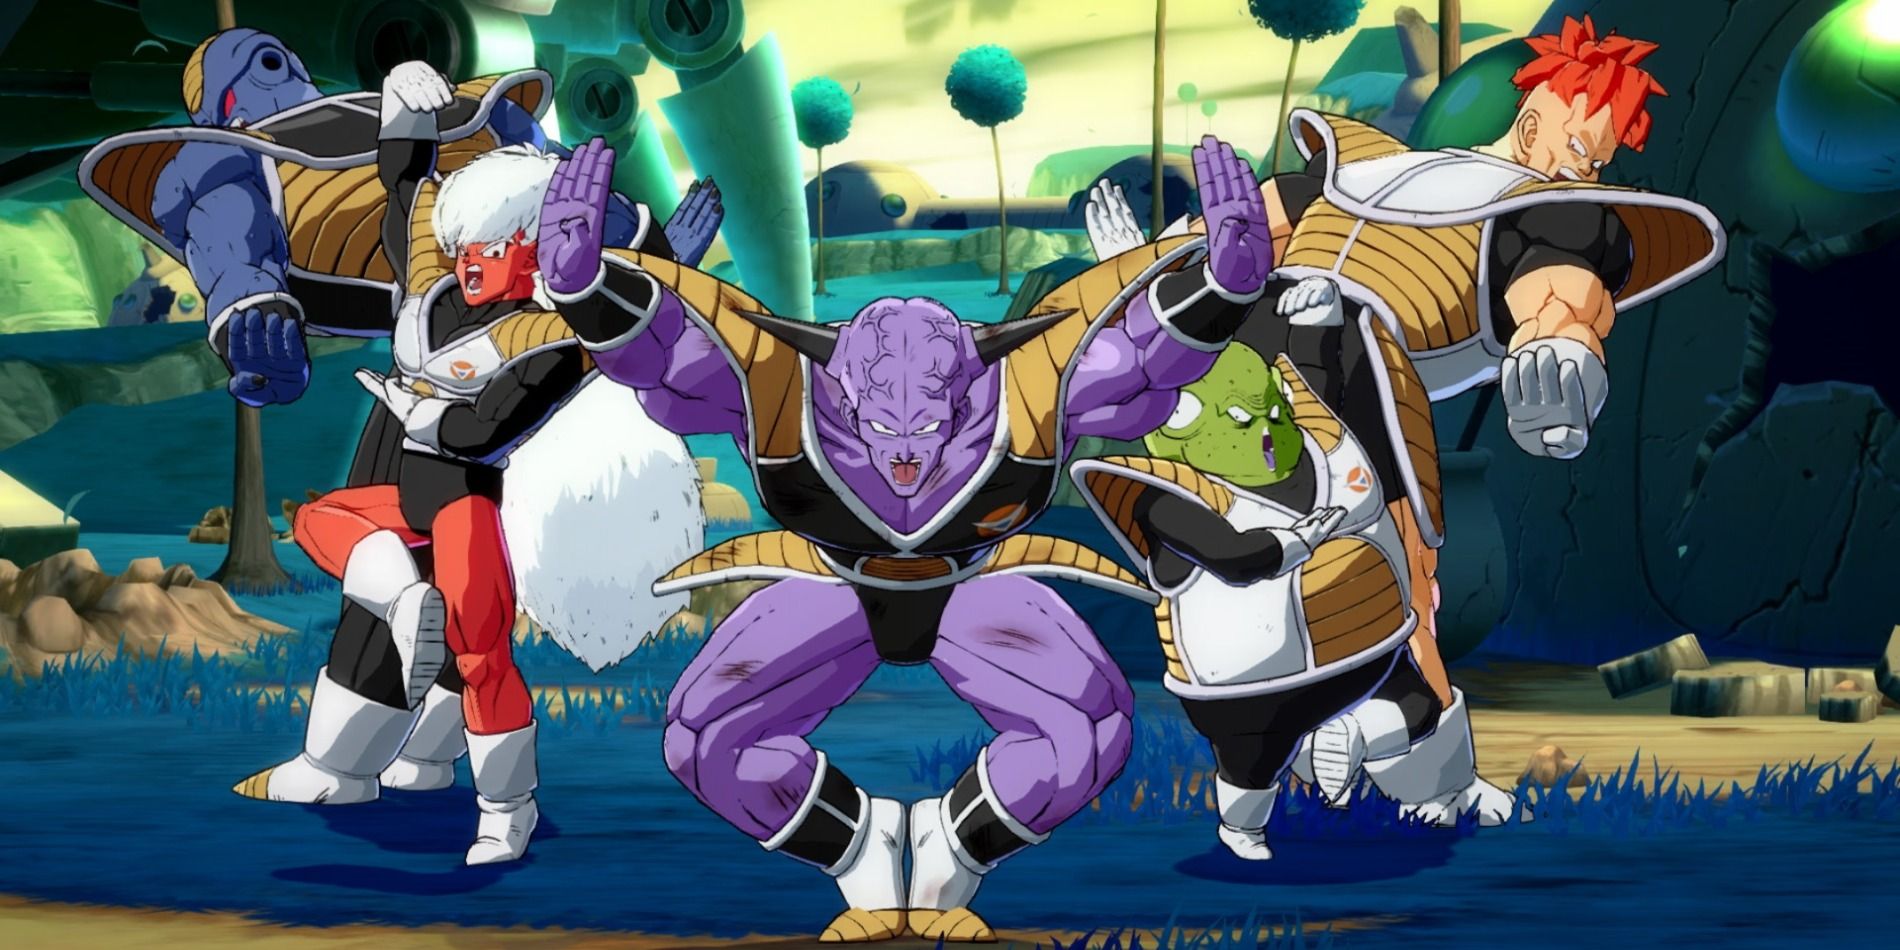 I guess we're showing Ginyu Force wedding photos now? : r/dbz